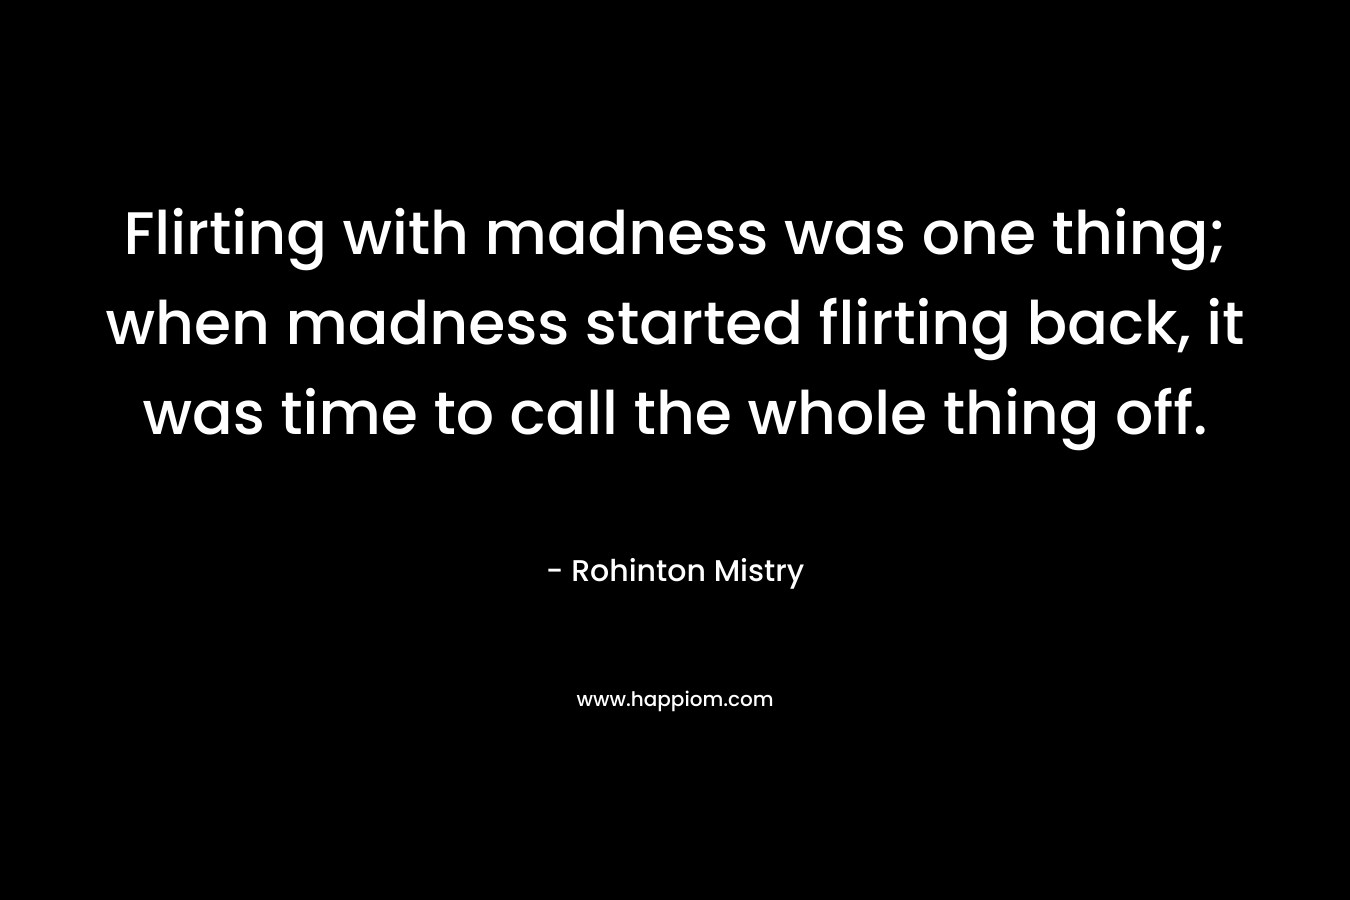 Flirting with madness was one thing; when madness started flirting back, it was time to call the whole thing off. – Rohinton Mistry